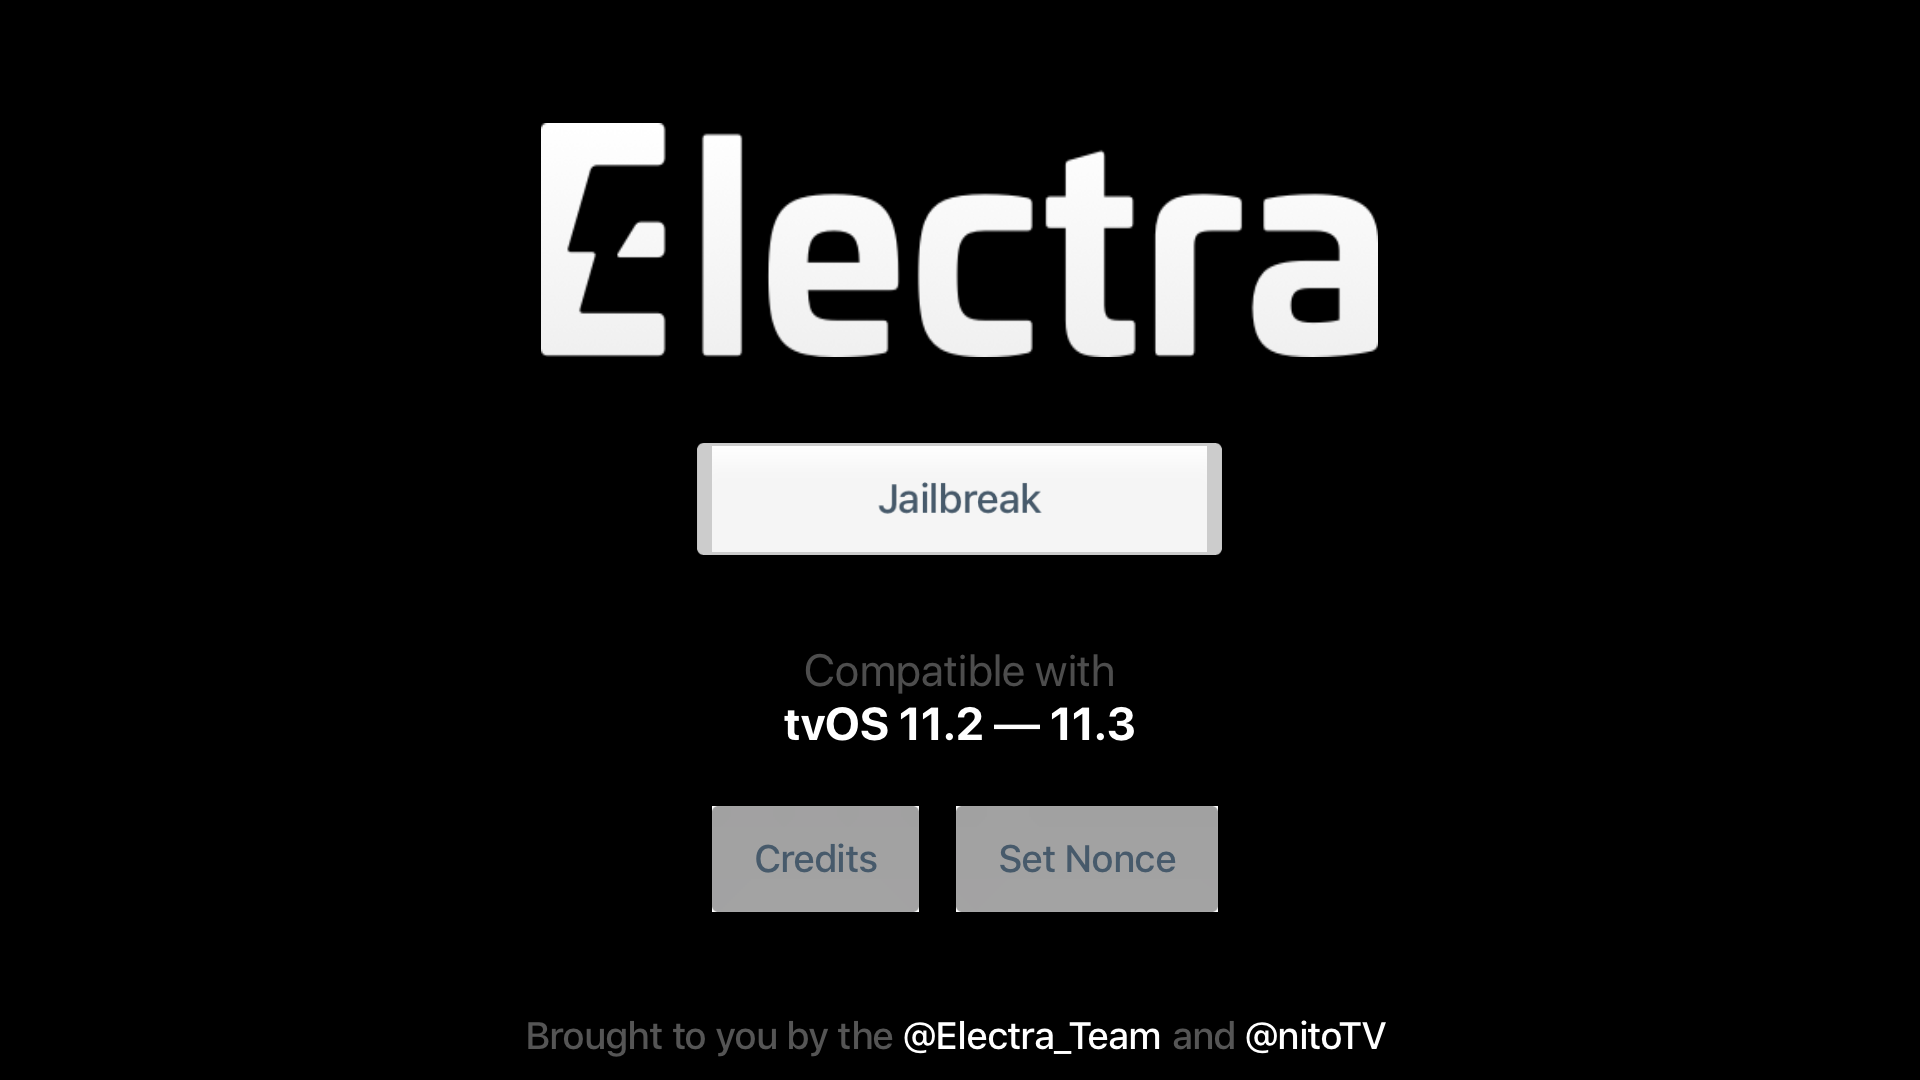 How to jailbreak Electra on Apple TV with tvOS 11.2-11.3